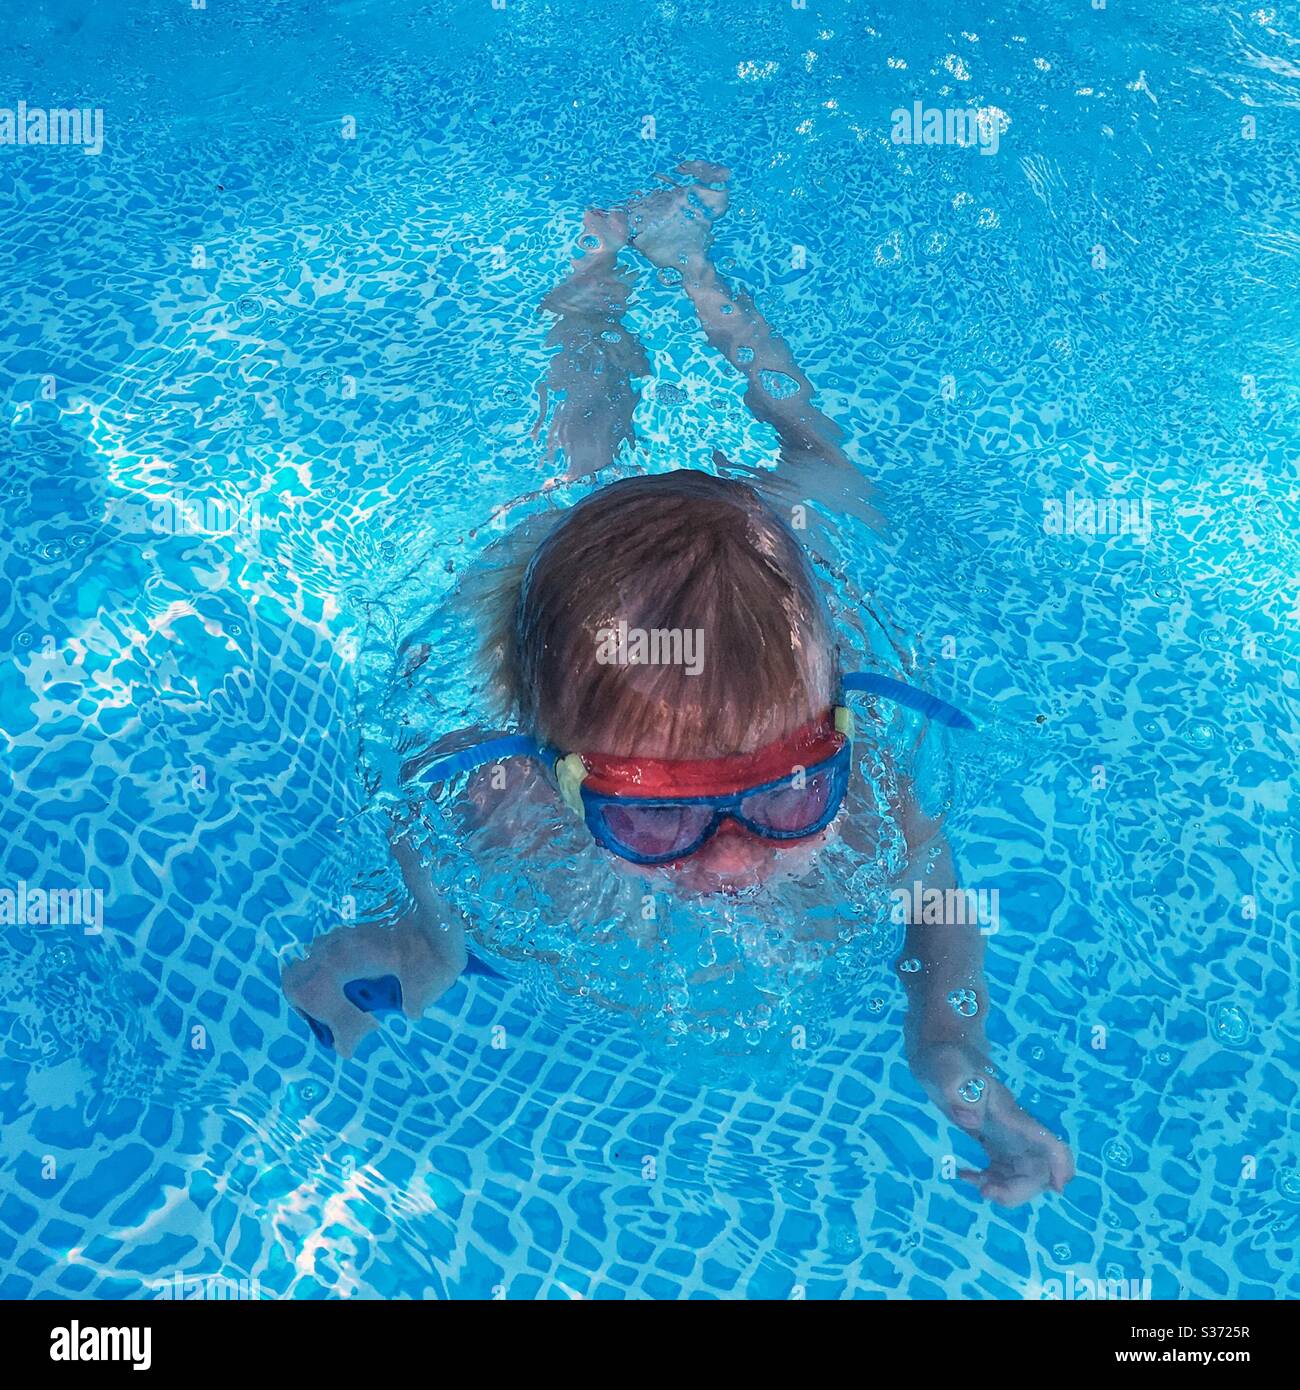 Boy swimming in a paddling pool wearing goggles. Stock Photo